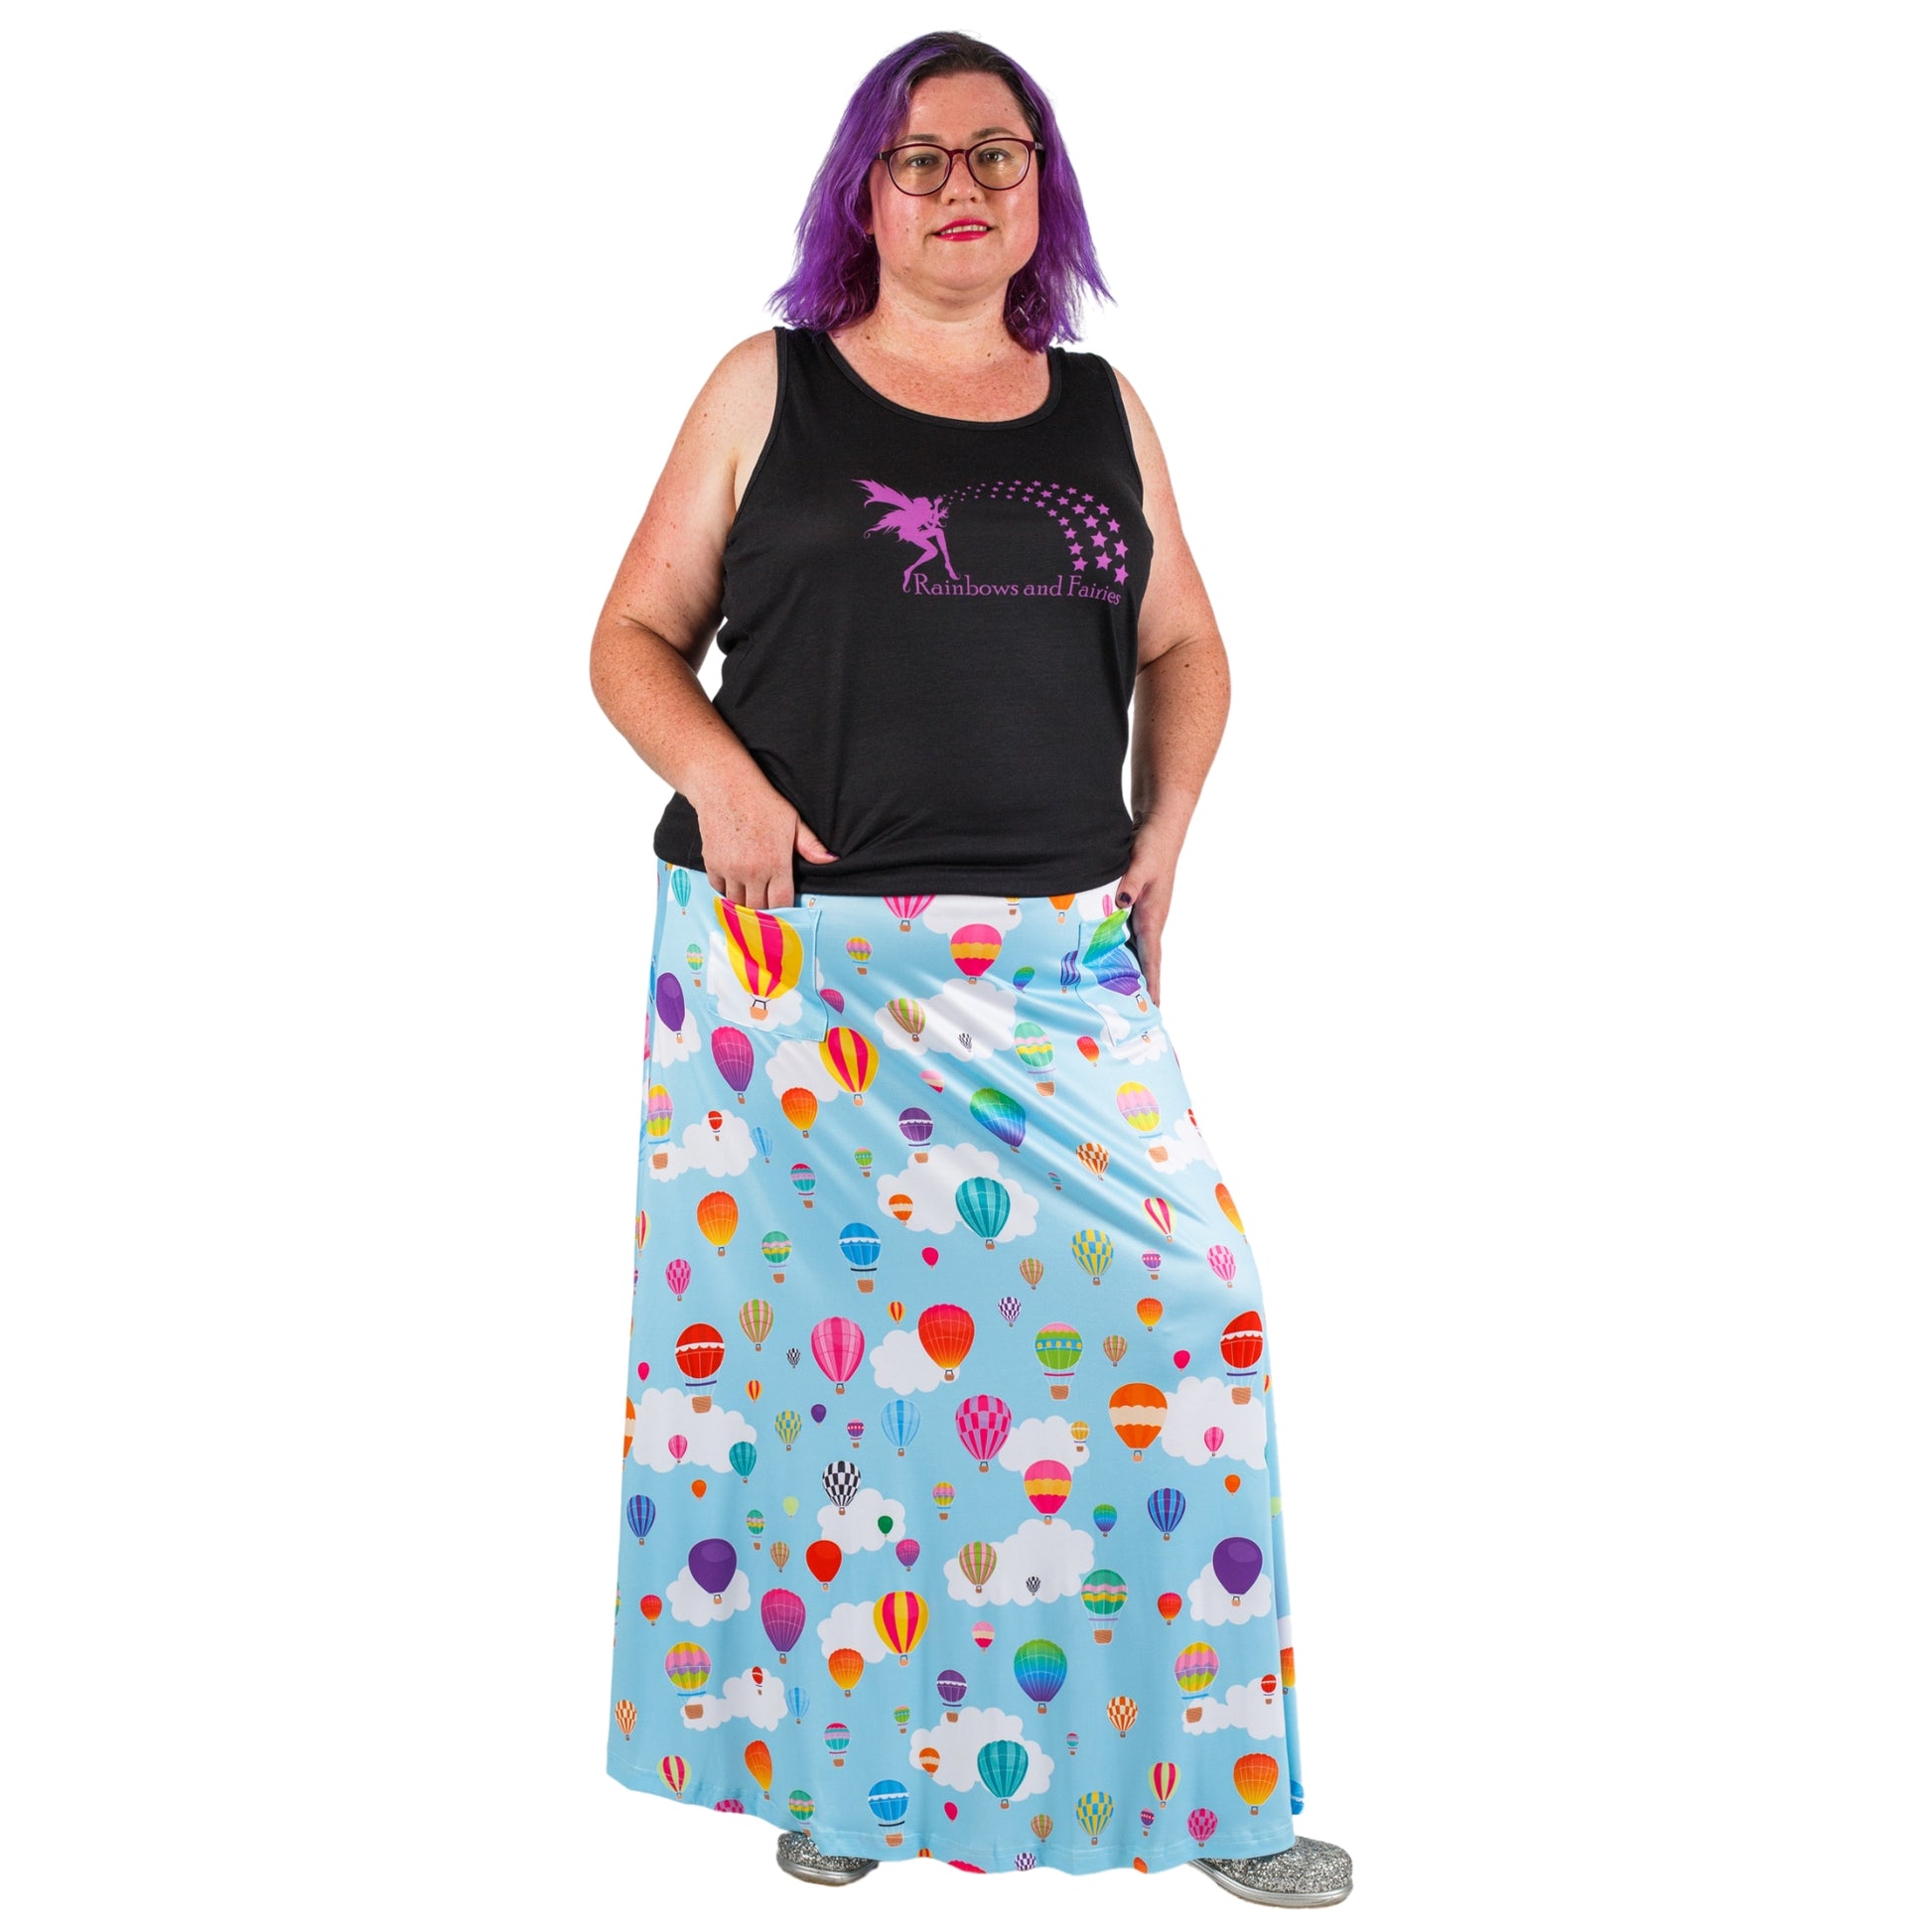 Whimsy Maxi Skirt by RainbowsAndFairies.com.au (Balloons - Hot Air Balloon - Long Skirt - Vintage Inspired - Boho - Skirt With Pockets) - SKU: CL_MAXIS_WHIMS_ORG - Pic-02